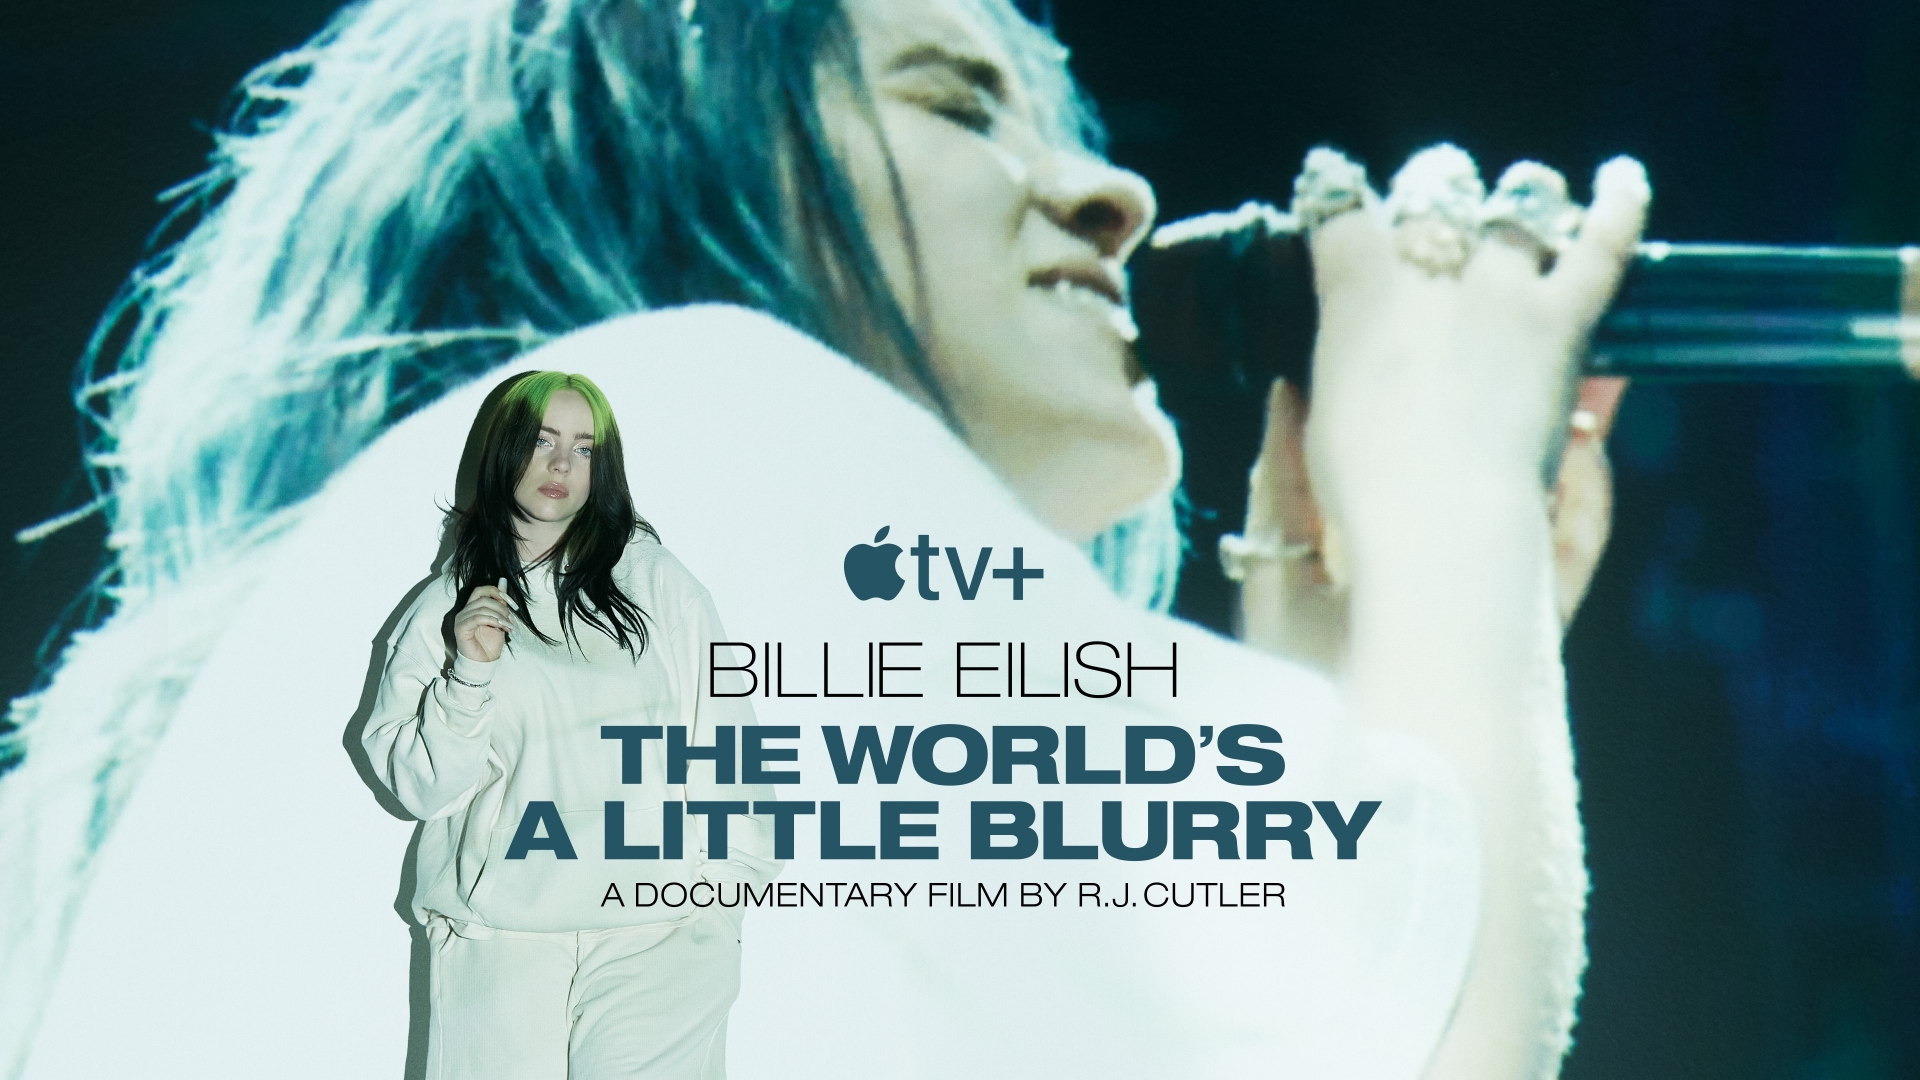 Billie Eilish documentary: The World's a Little Blurry will be out today. Photo: KXT 91.7